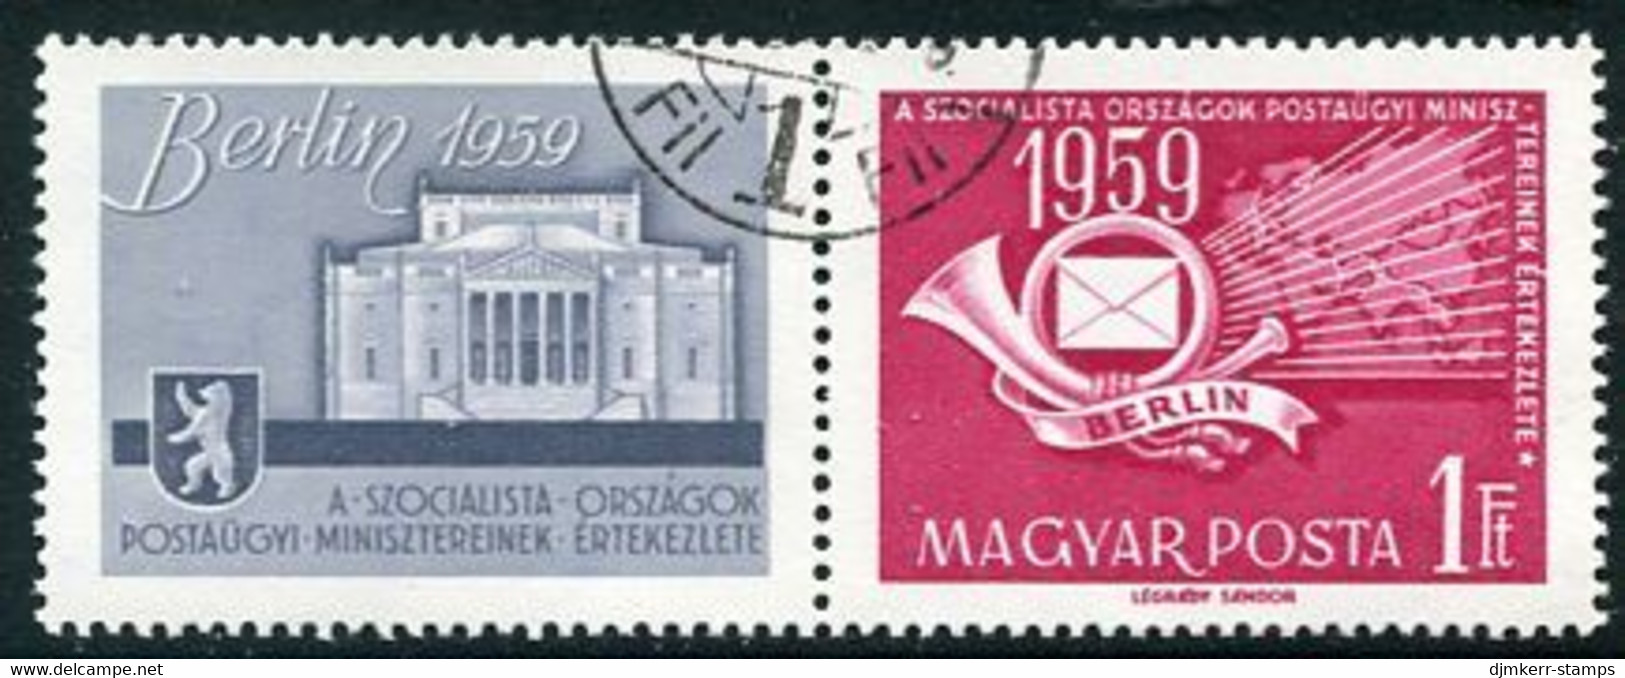 HUNGARY 1959 Socialist Minister's Postal Conference   Used.  Michel 1592 - Used Stamps